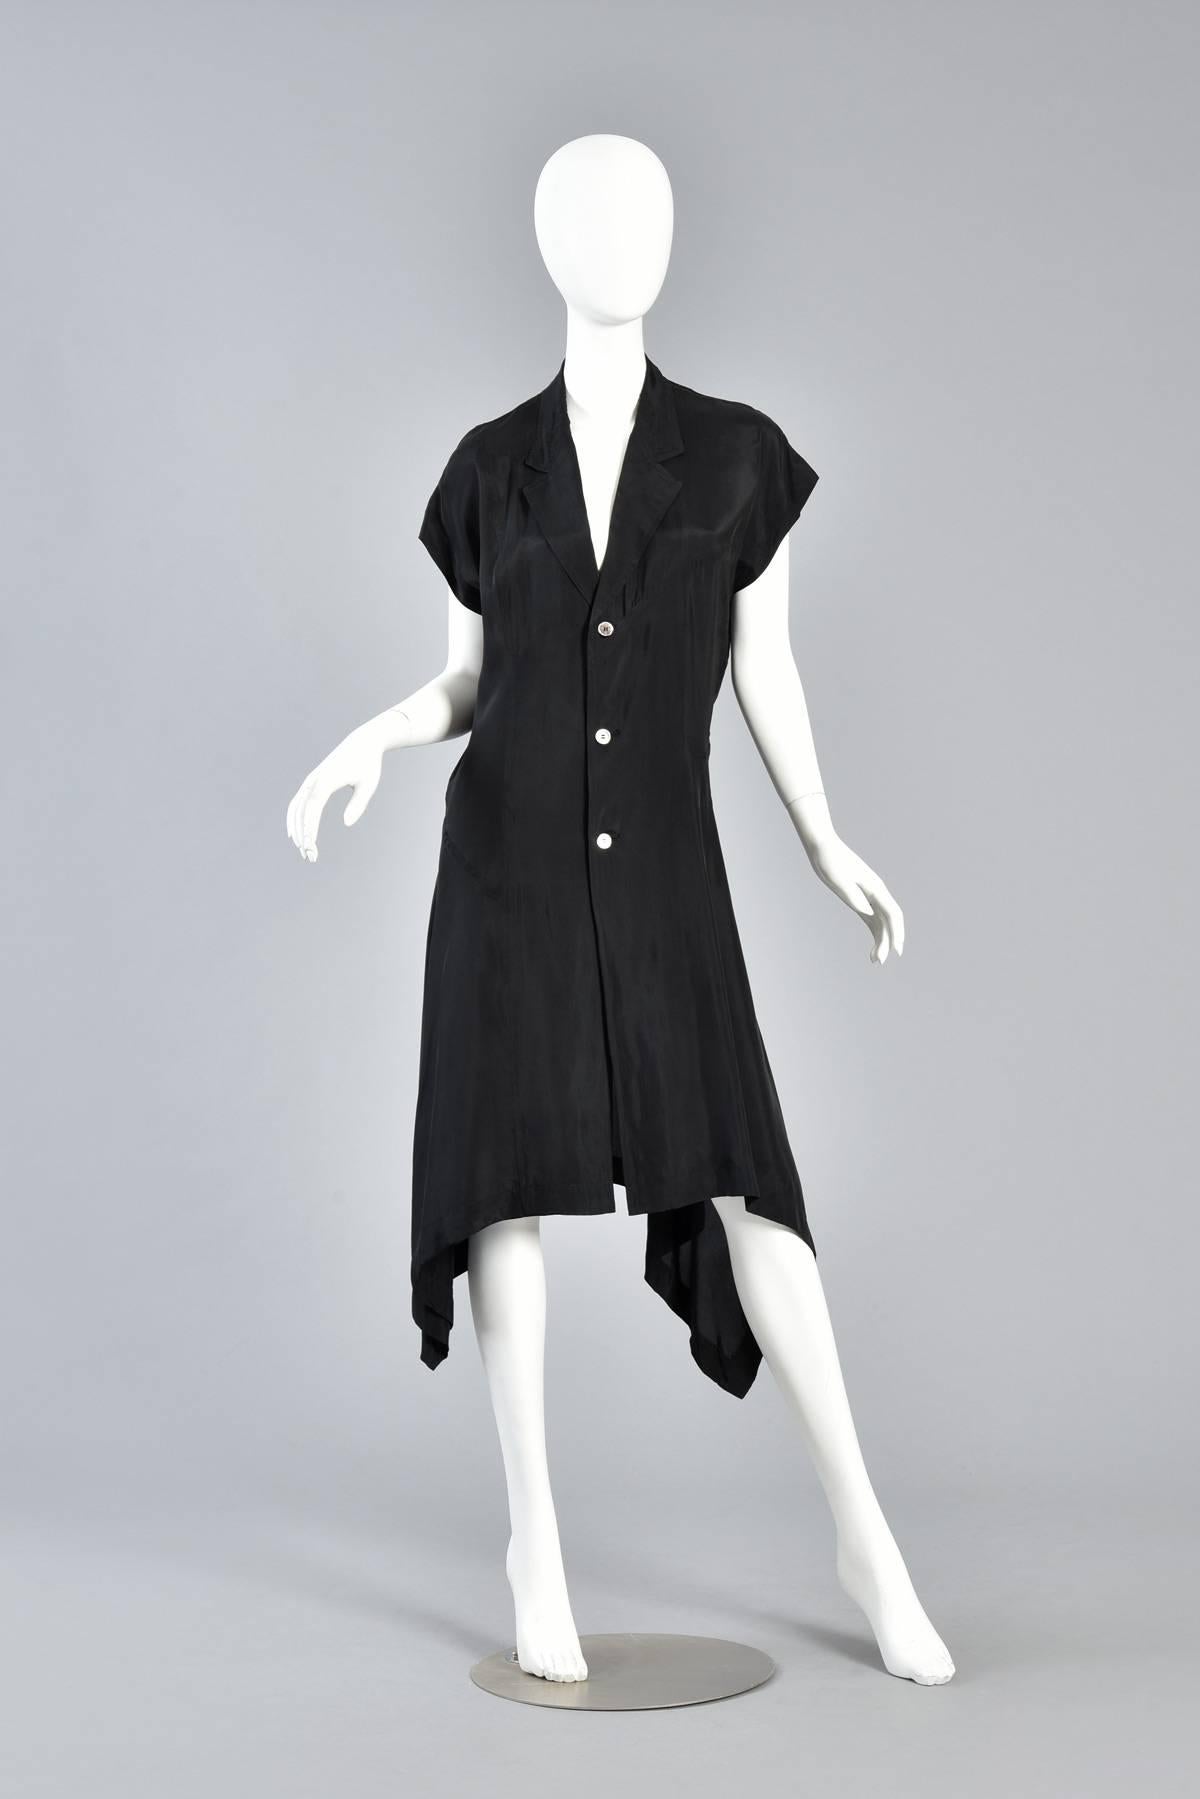 Classic (as far as Comme des Garcons is concerned anyway) asymmetrical black dress. Simple button front with slouchy shoulders, deep-cut collar and asymmetric draped hem. We love the gathering at the waist on the wearer's left side! Flattering on a